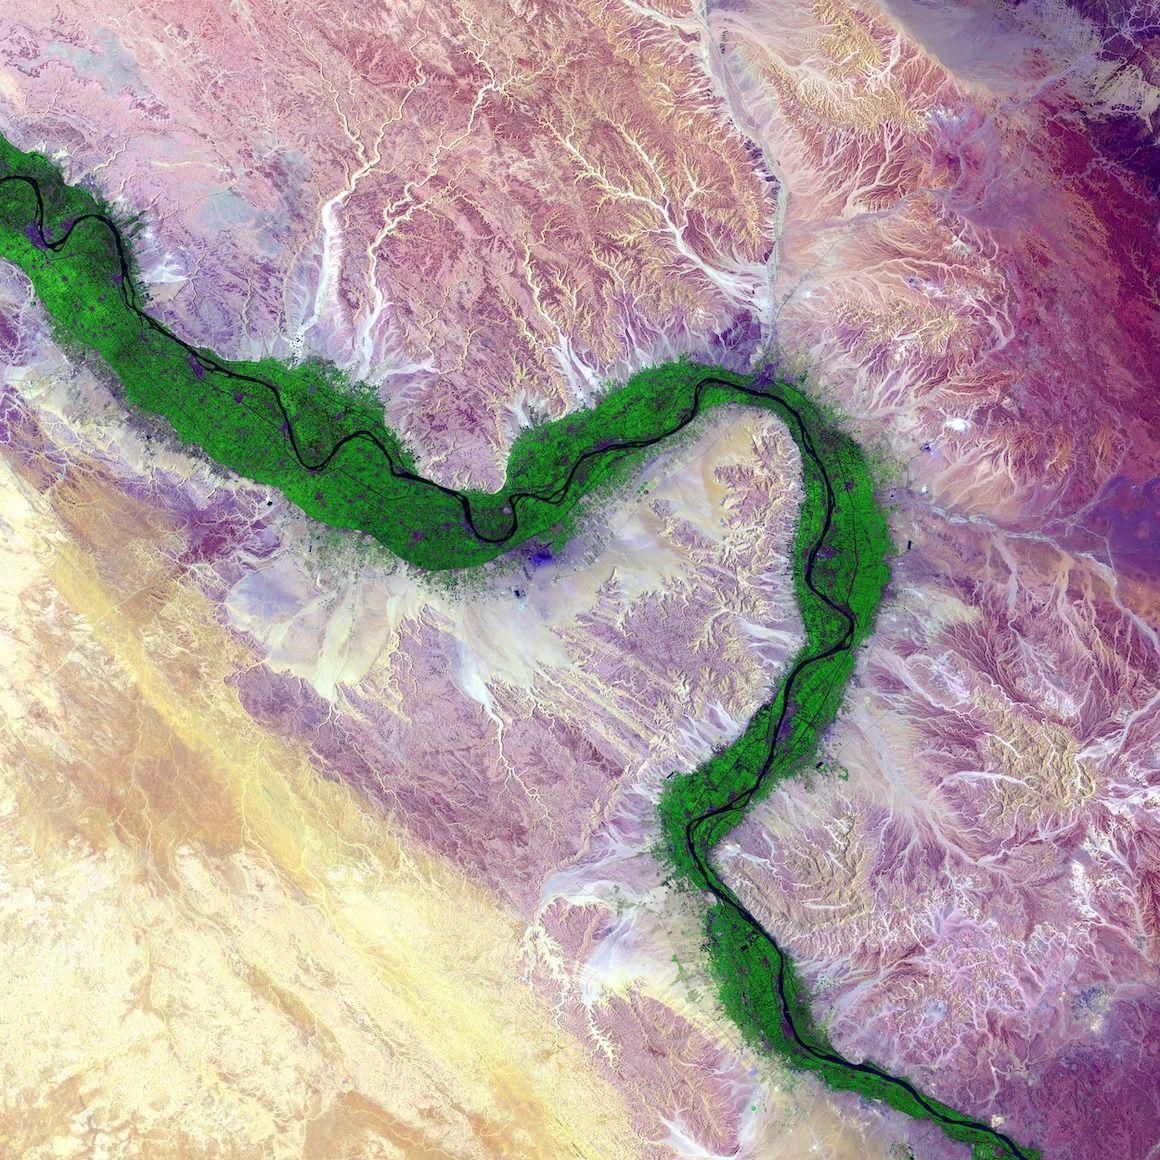 Discover the longest river in Africa